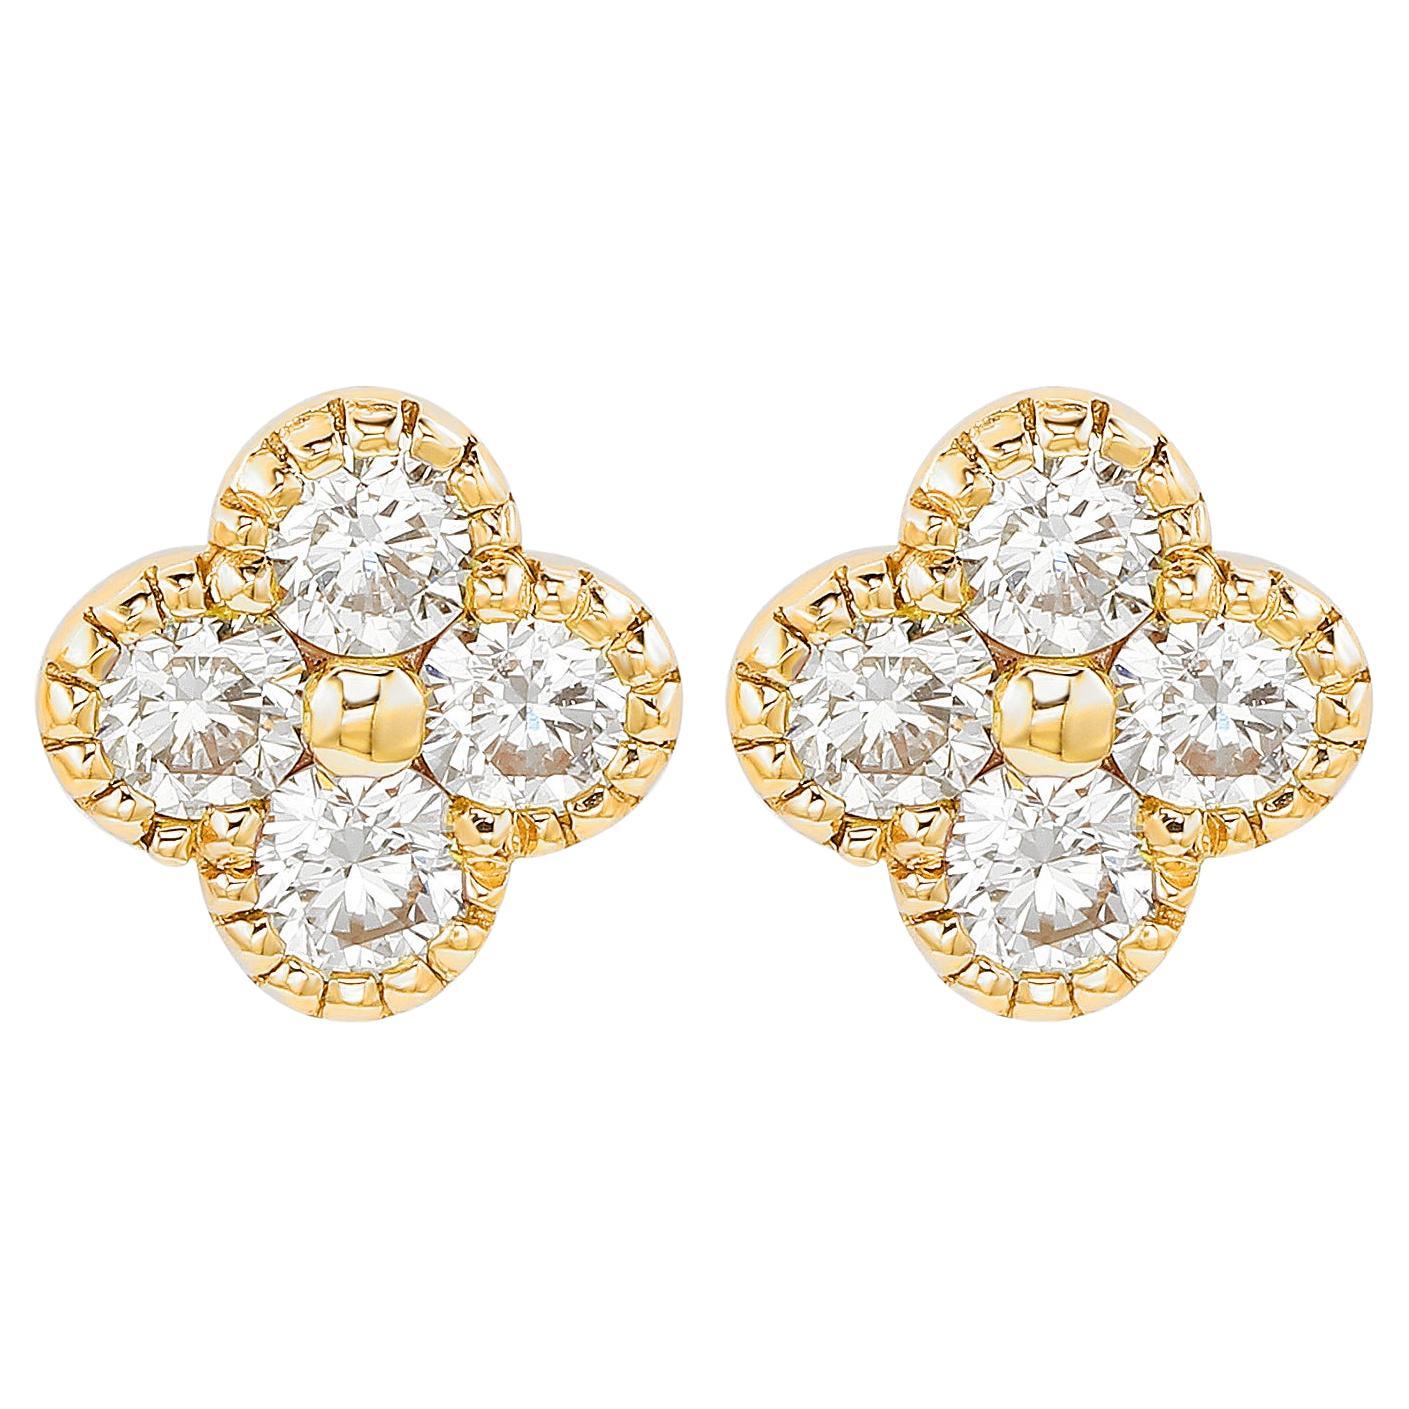 Suzy Levian 14K Yellow Gold 0.40 CTTW Diamond Clover Stud Earrings For Sale